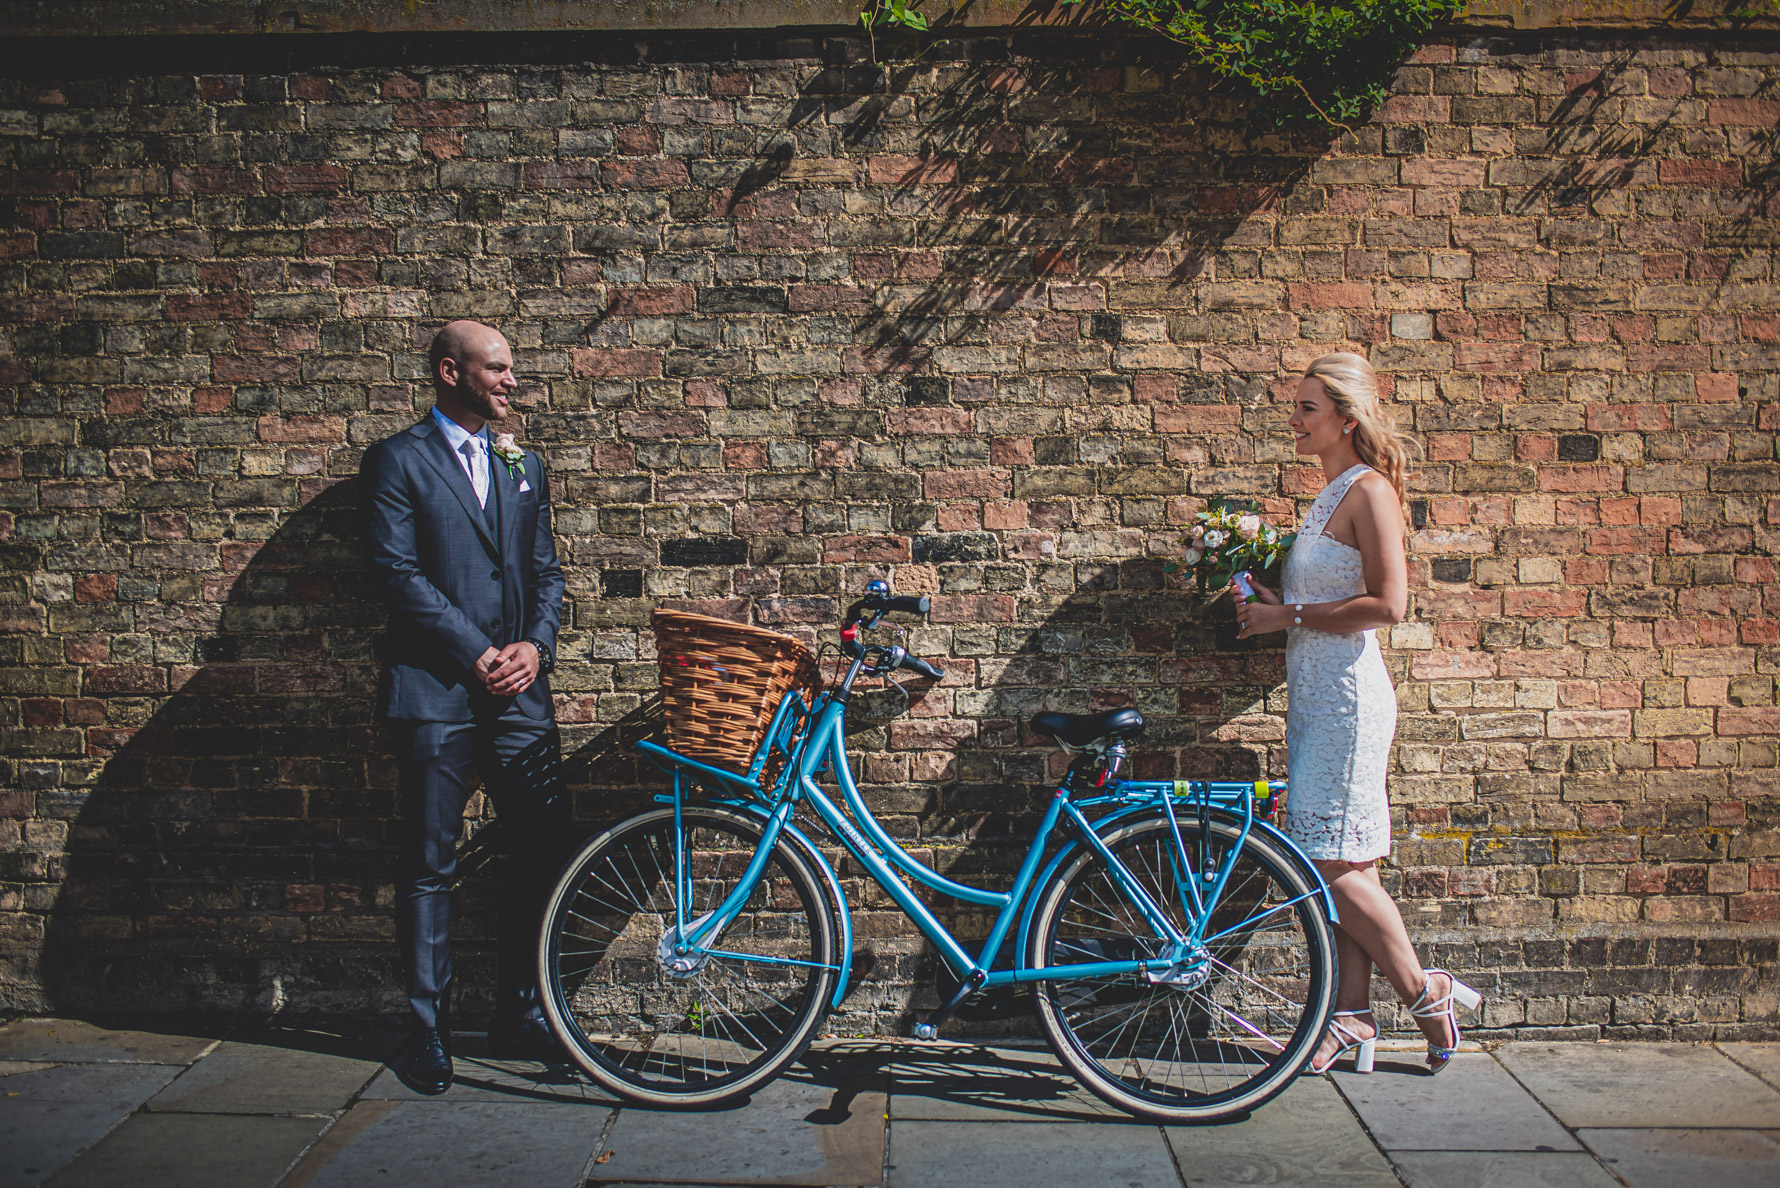 Bride & Groom by an old wall and bike in Cambridge